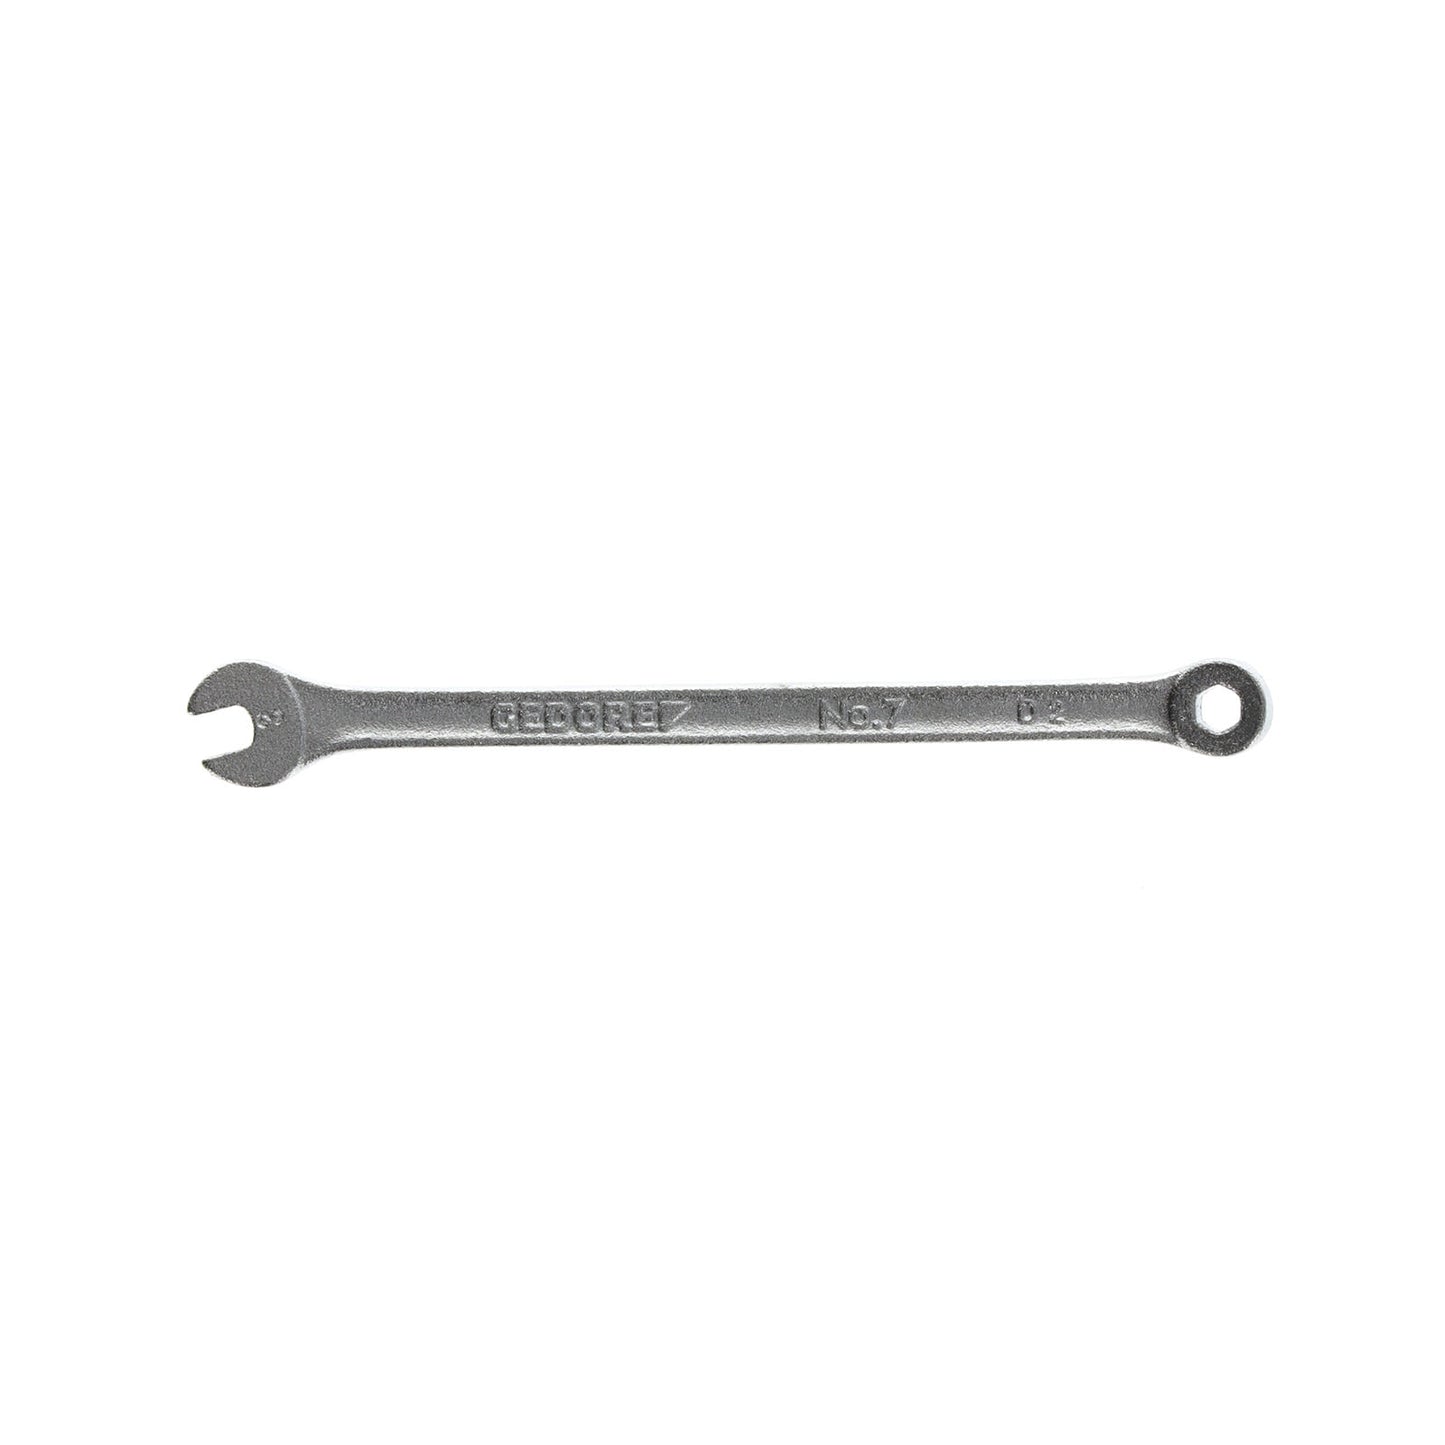 GEDORE 7 3 - Combination Wrench, 3 mm (6080680)